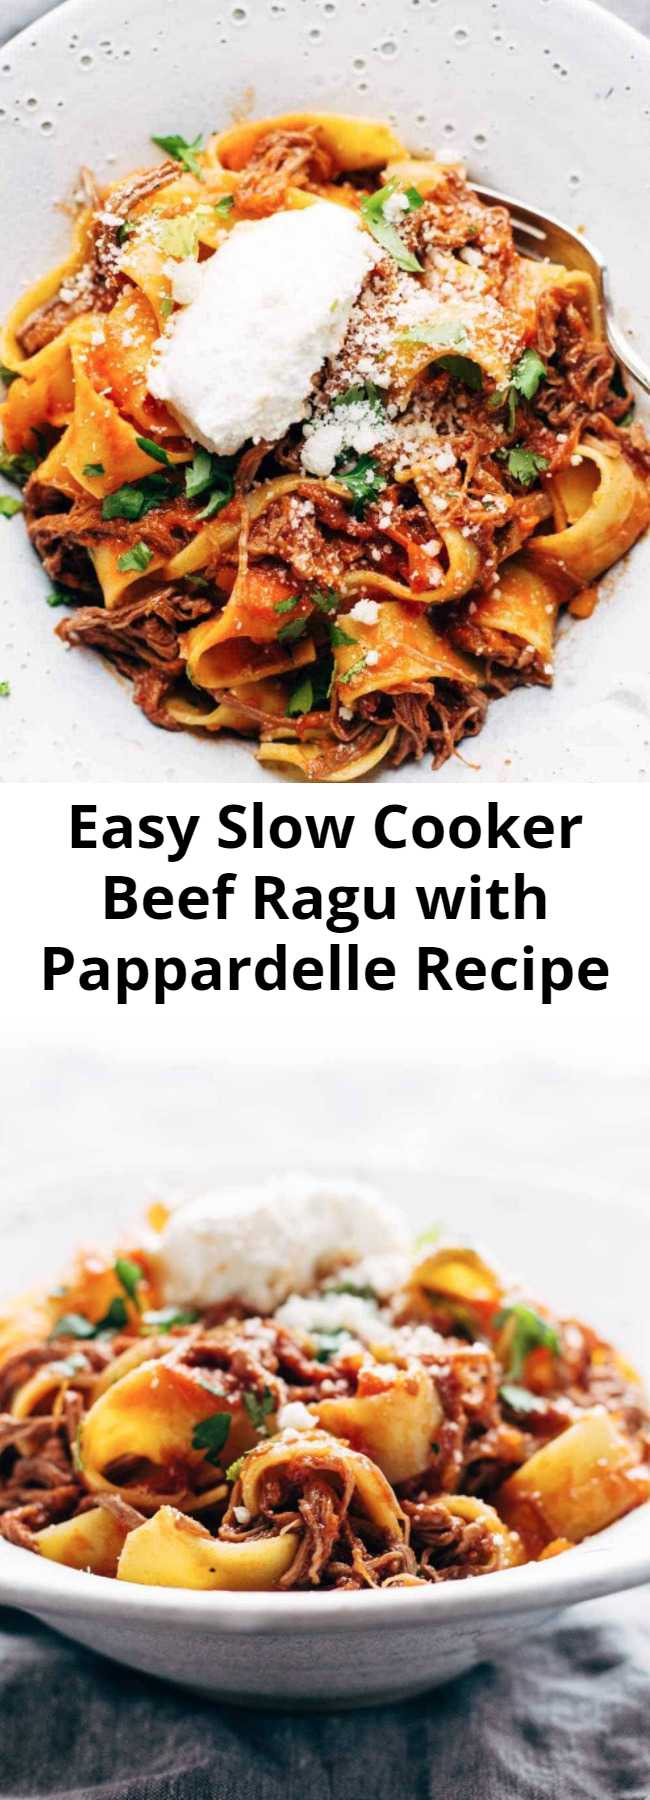 Easy Slow Cooker Beef Ragu with Pappardelle Recipe - Easy comfort food. We’re making this cozy, comforting Beef Ragu with Pappardelle! Steak is braised in the crockpot for hours with garlic, tomatoes, veggies, and herbs, then shredded and piled high on pappardelle with Parm cheese. #pasta #pappardelle #brunch